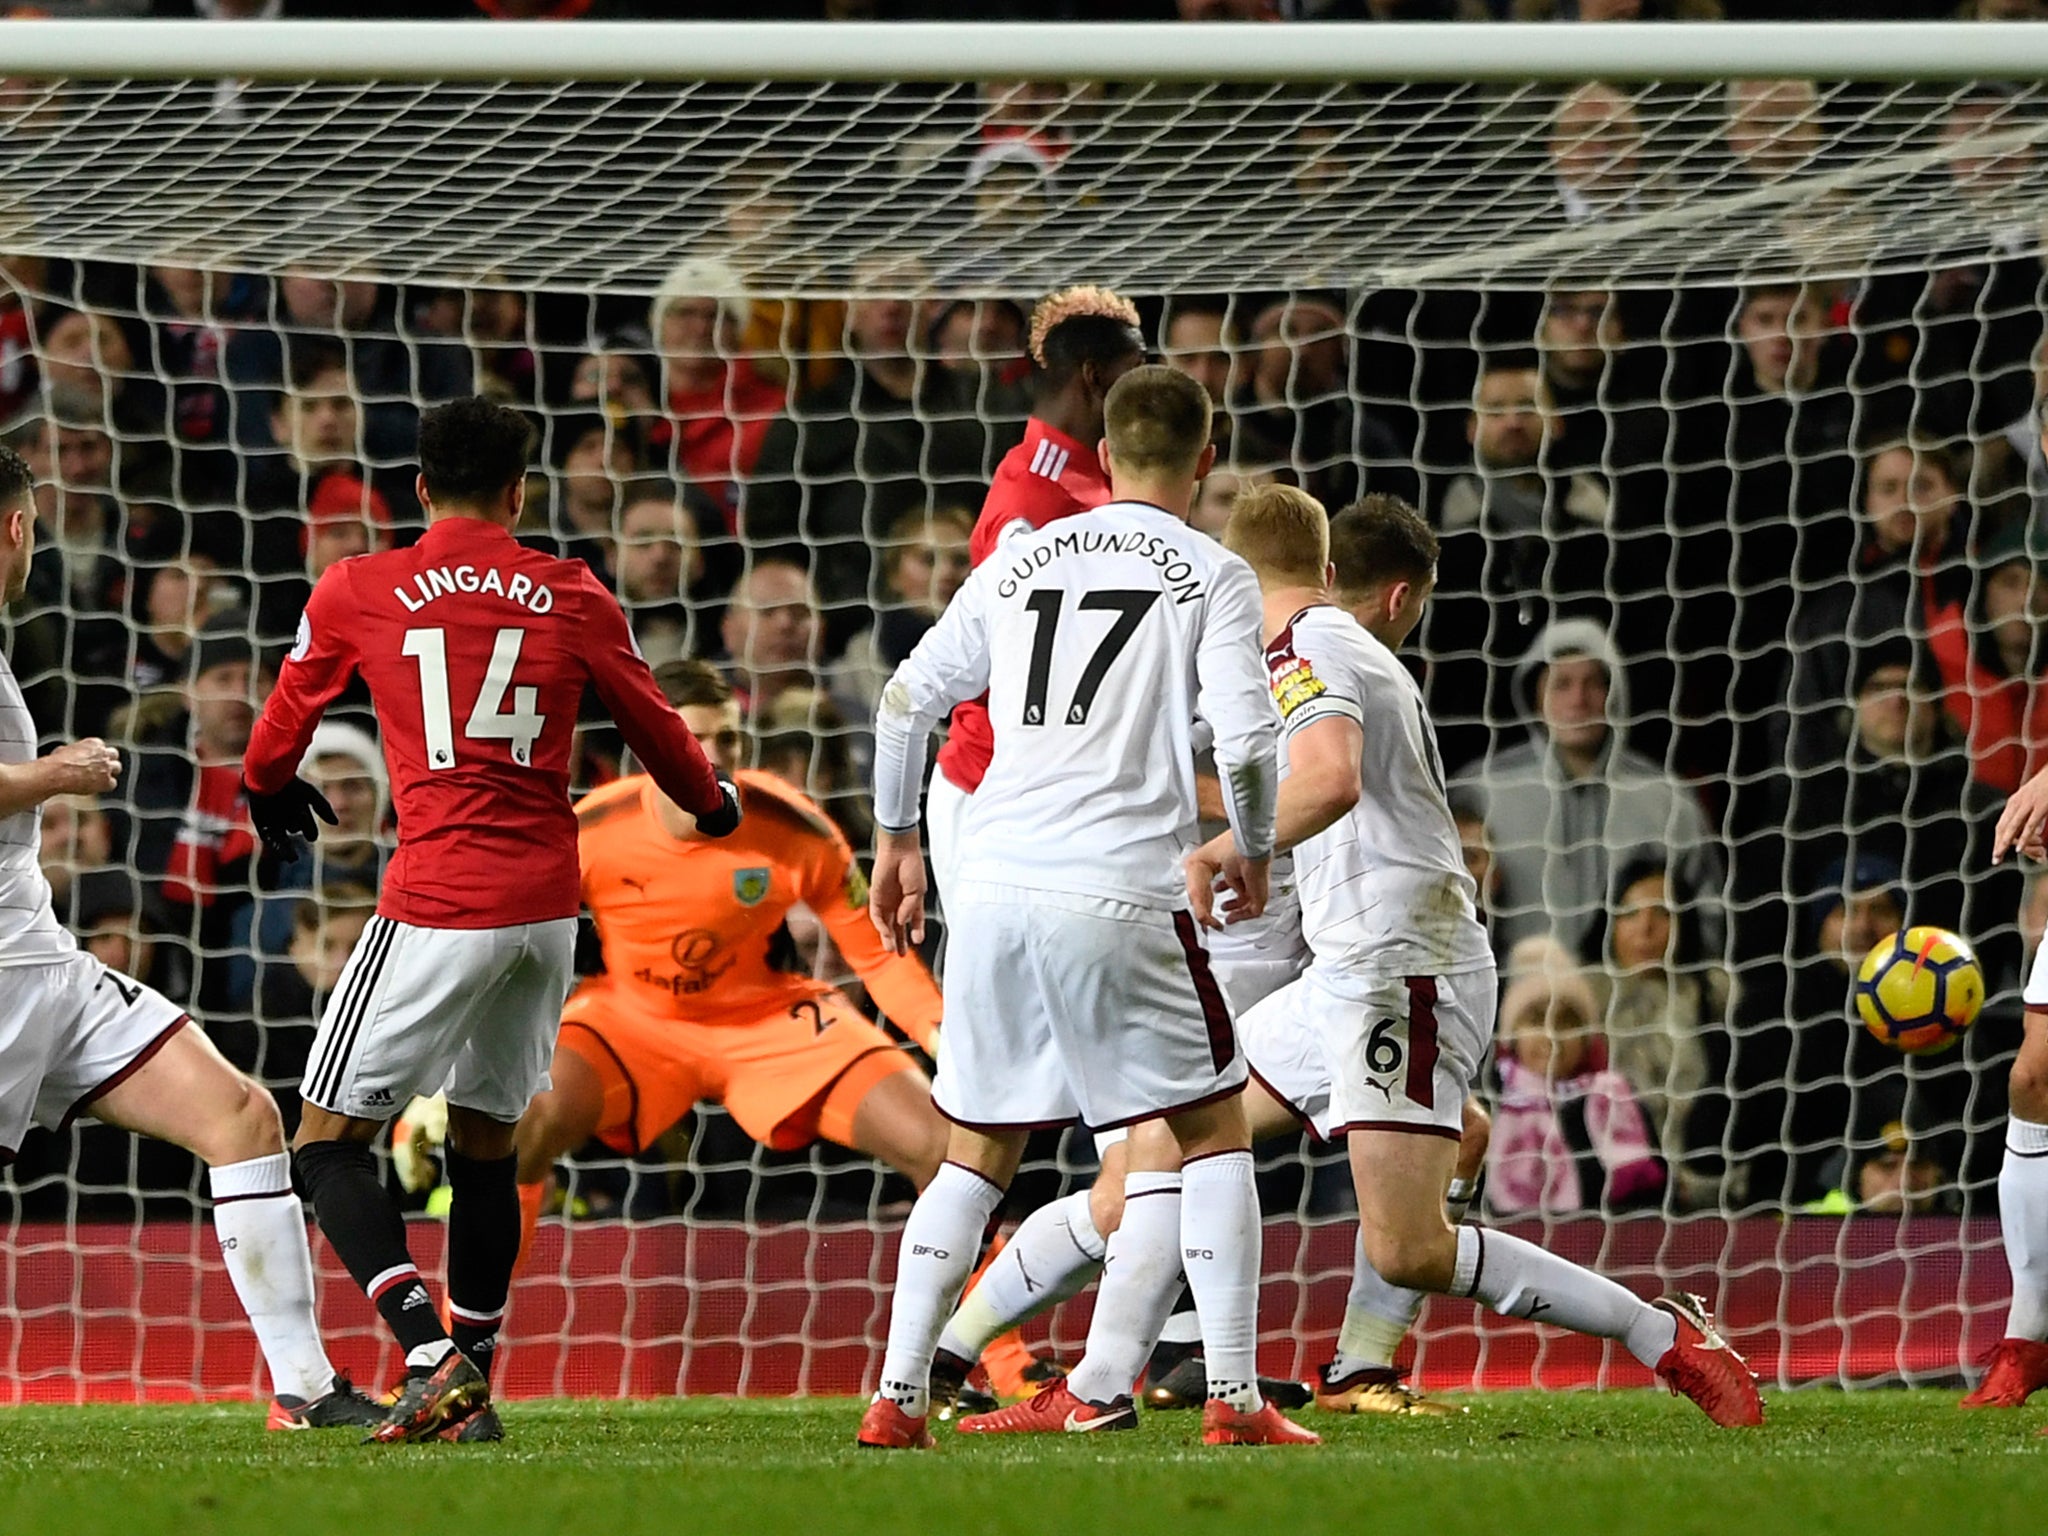 Lingard fires in United's equaliser to split the points